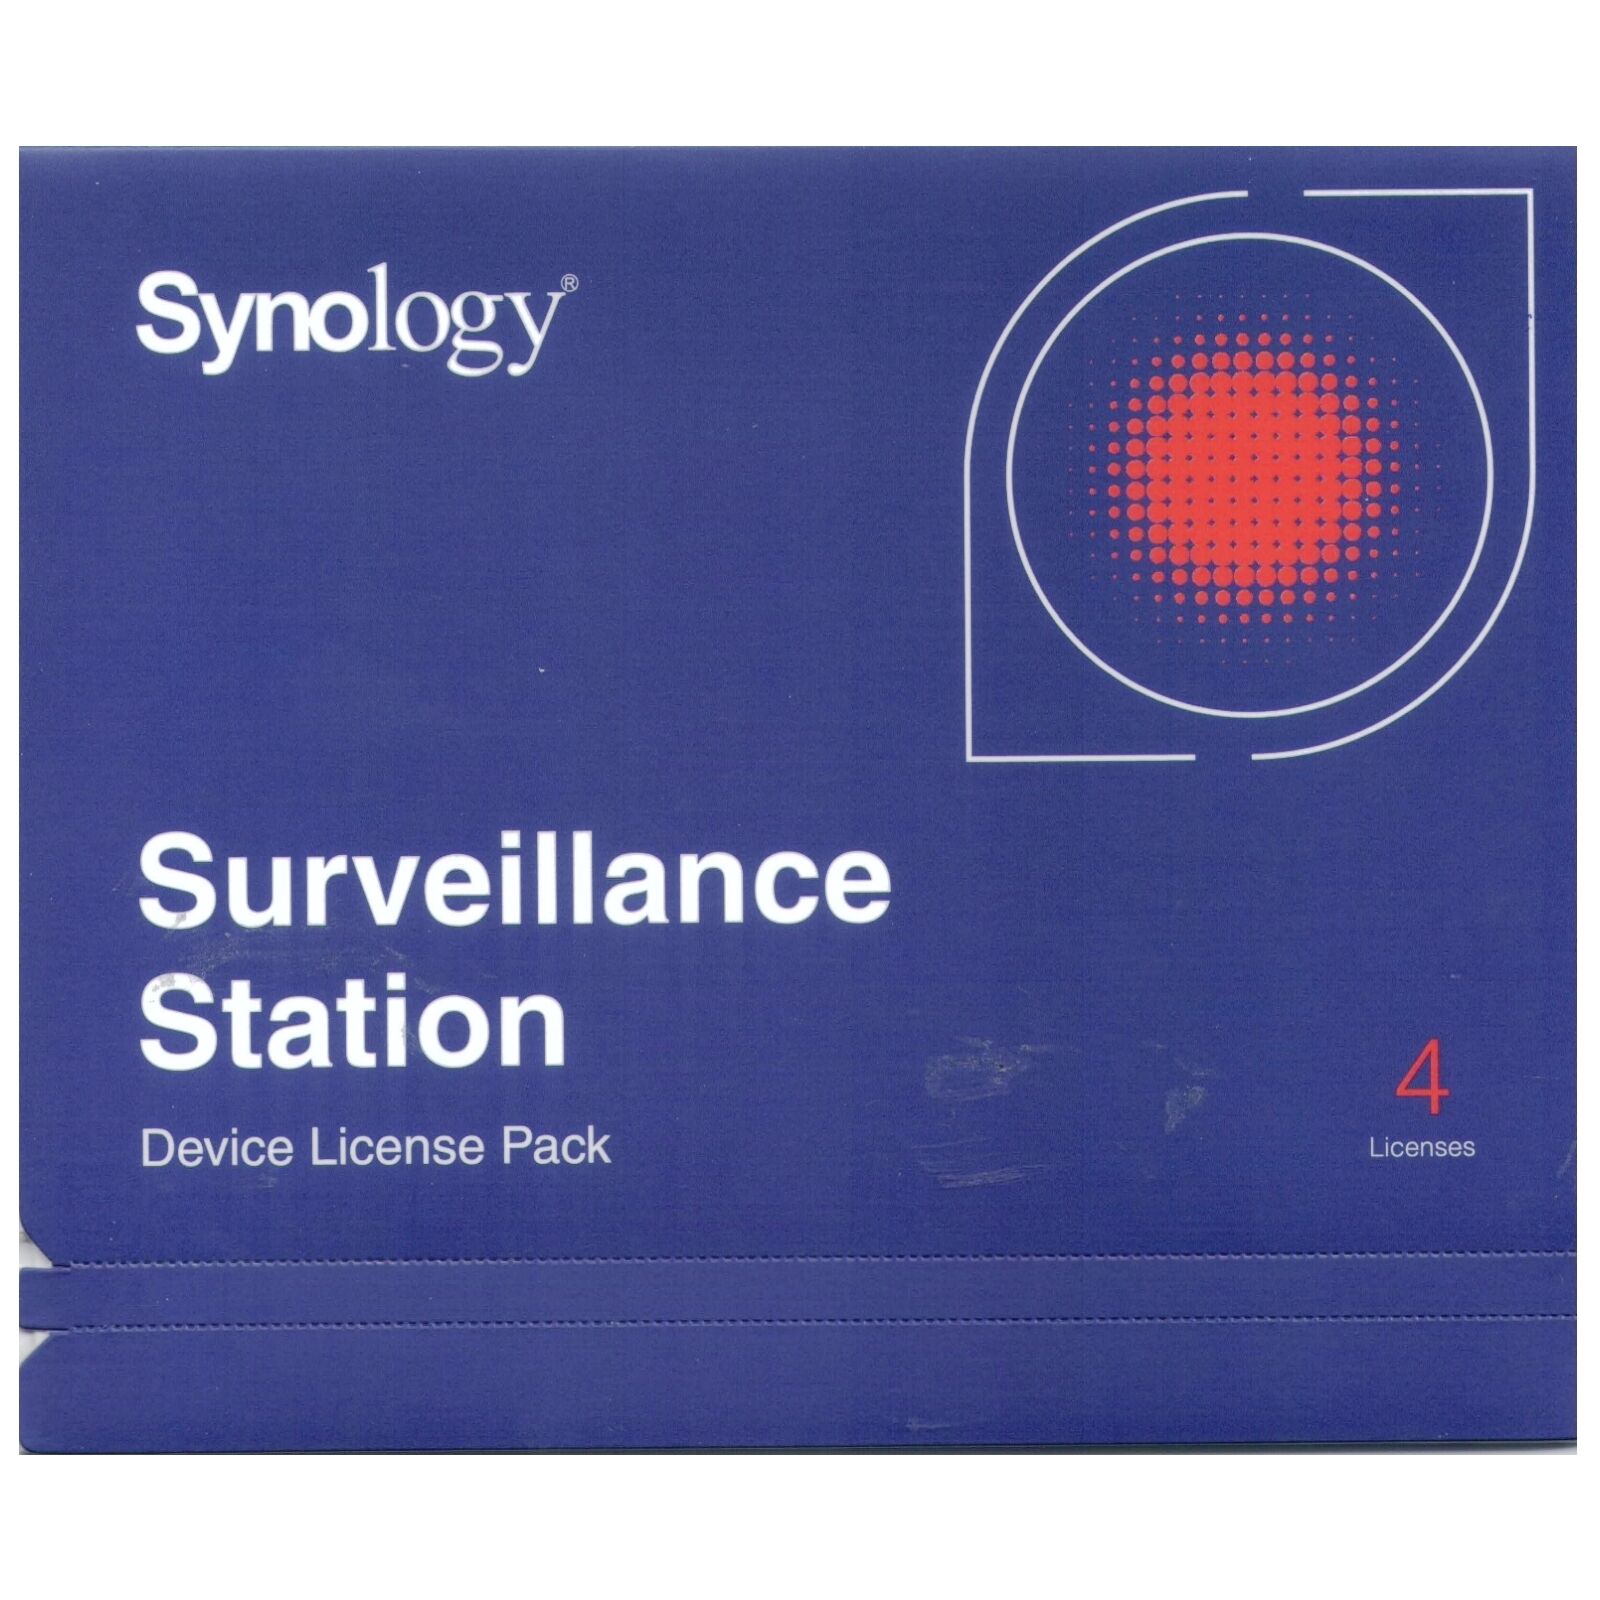 Synology IP Camera 4-License Pack Kit for Surveillance Station - All-Bays NAS